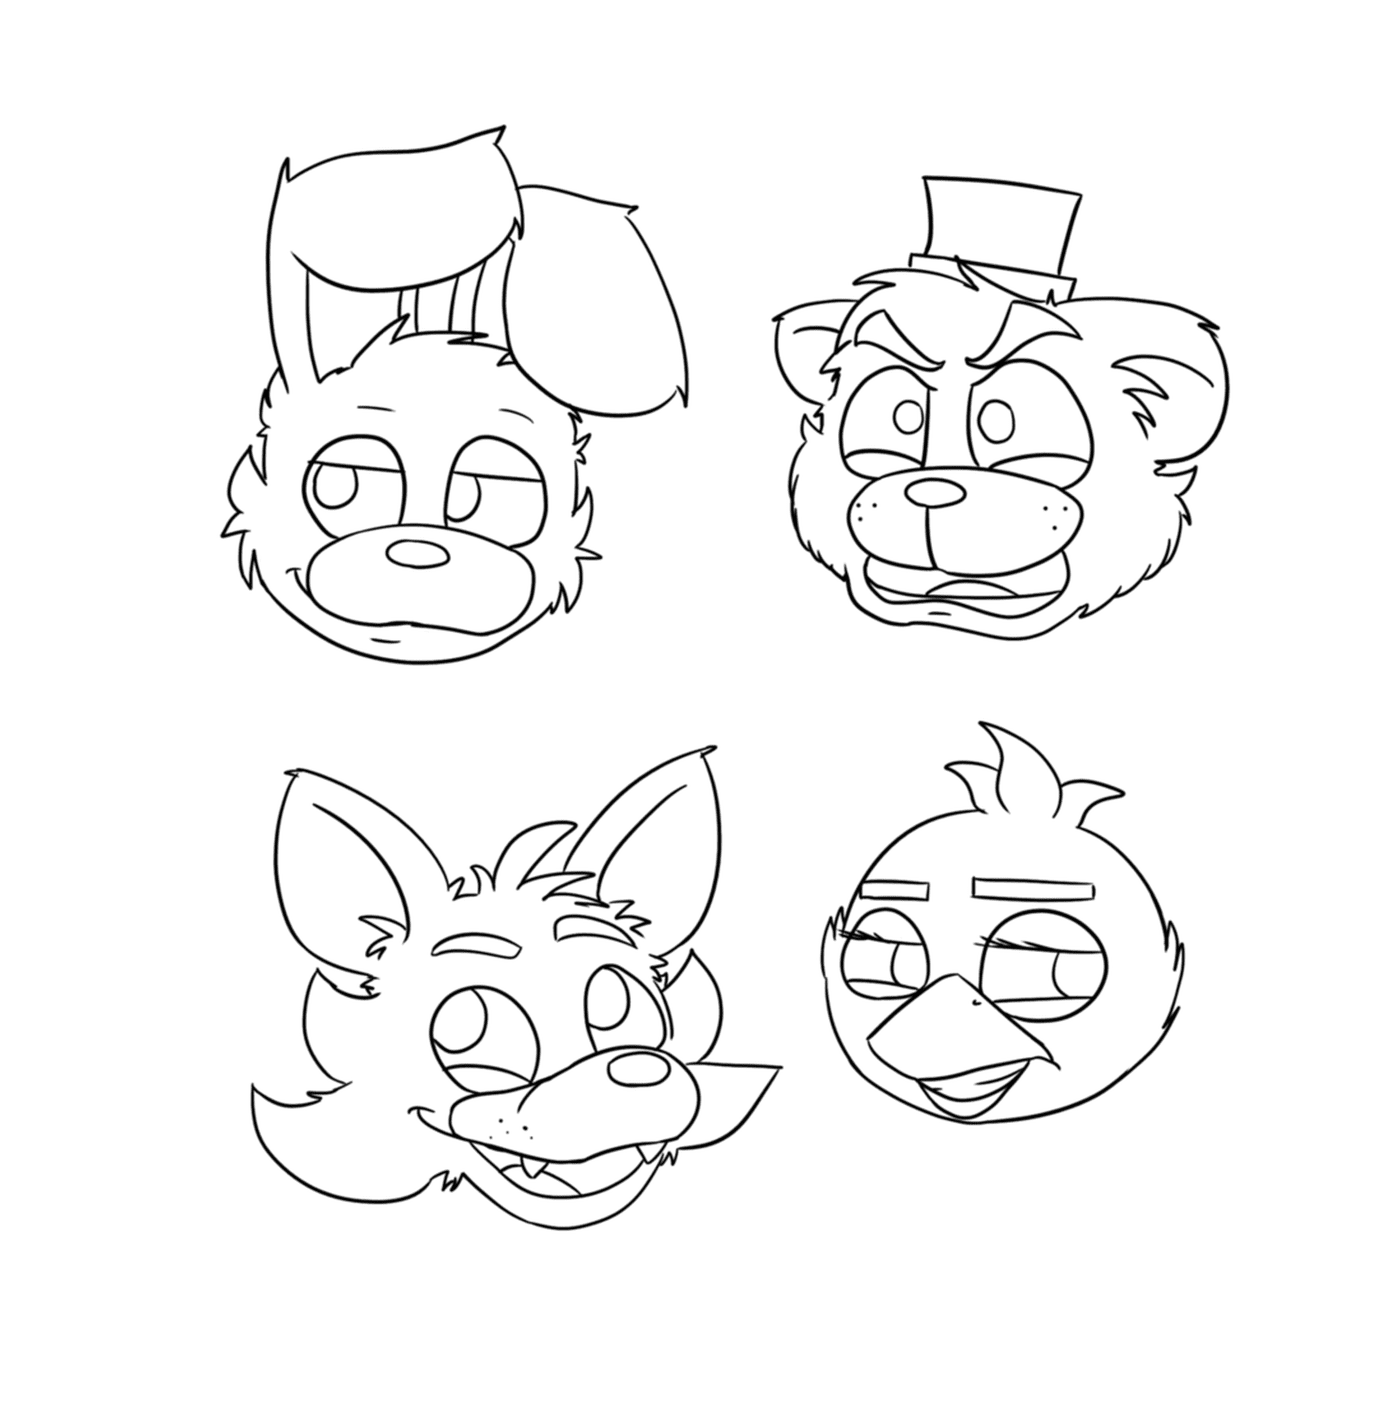  A variety of animal-shaped faces 